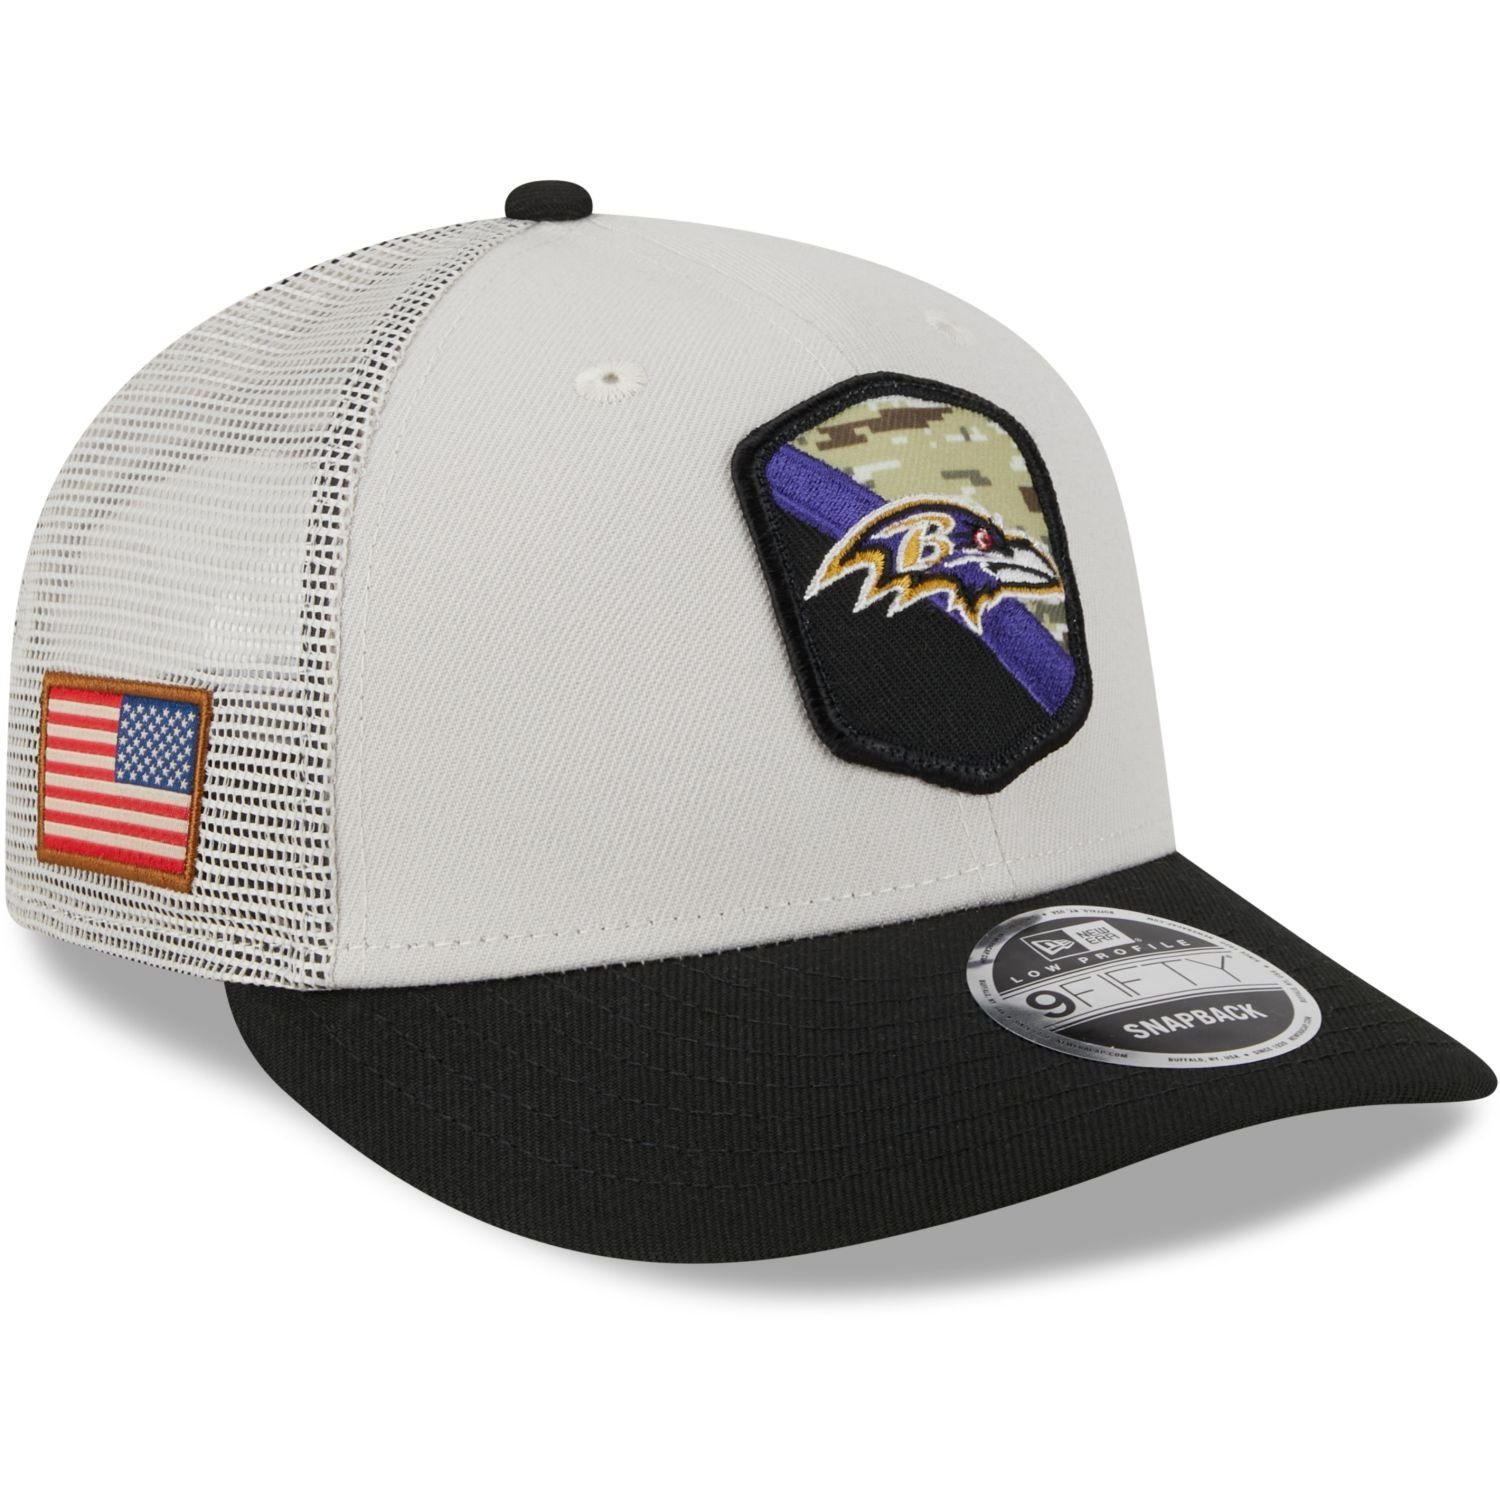 New Era Baltimore Salute to Profile Ravens Cap NFL Snapback Snap Service 9Fifty Low